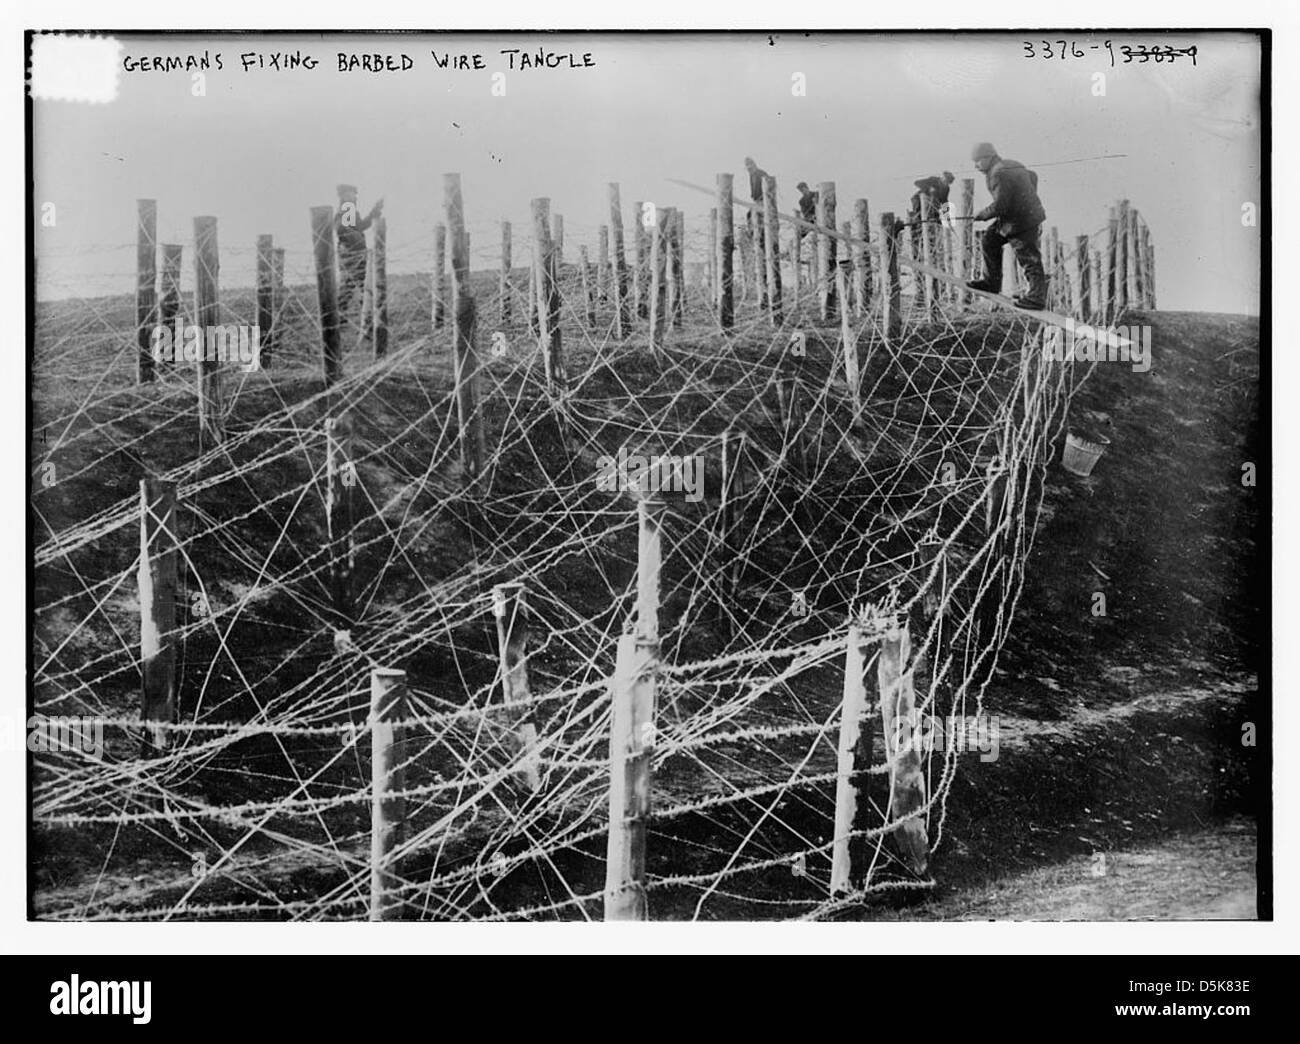 Germans fixing barbed wire tangle (LOC) Stock Photo